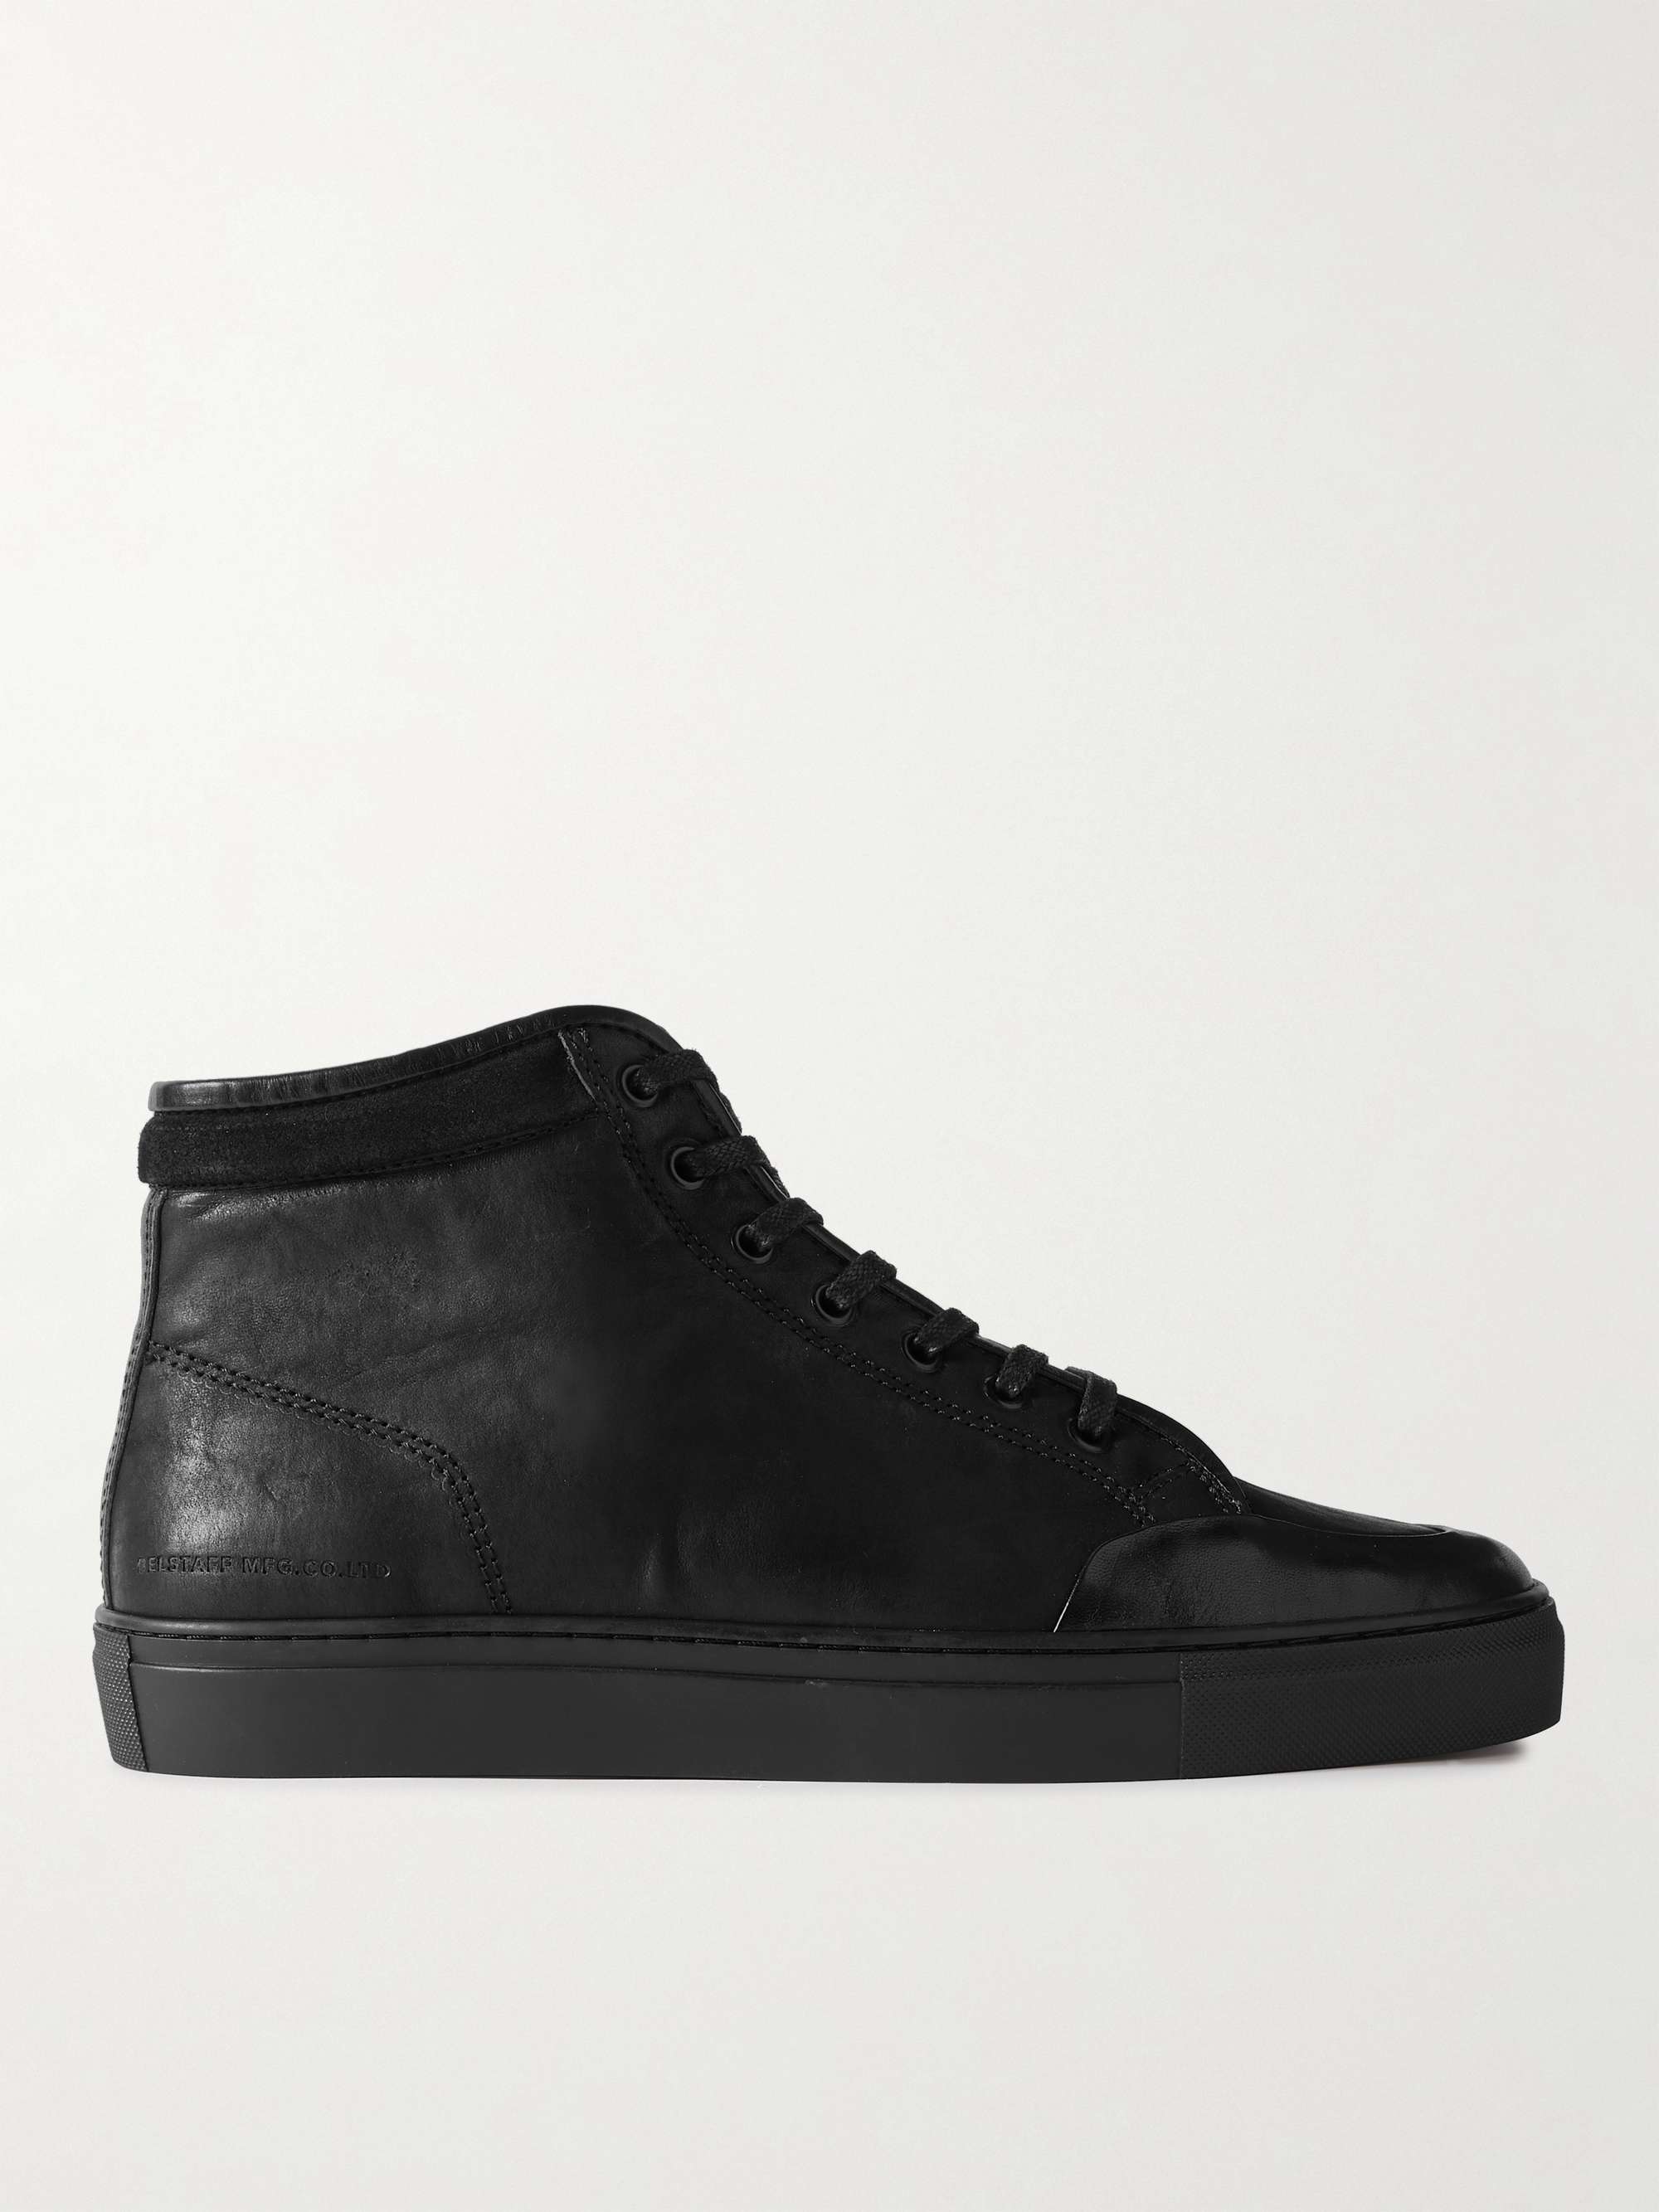 BELSTAFF Rally Suede-Trimmed Leather High-Top Sneakers | MR PORTER